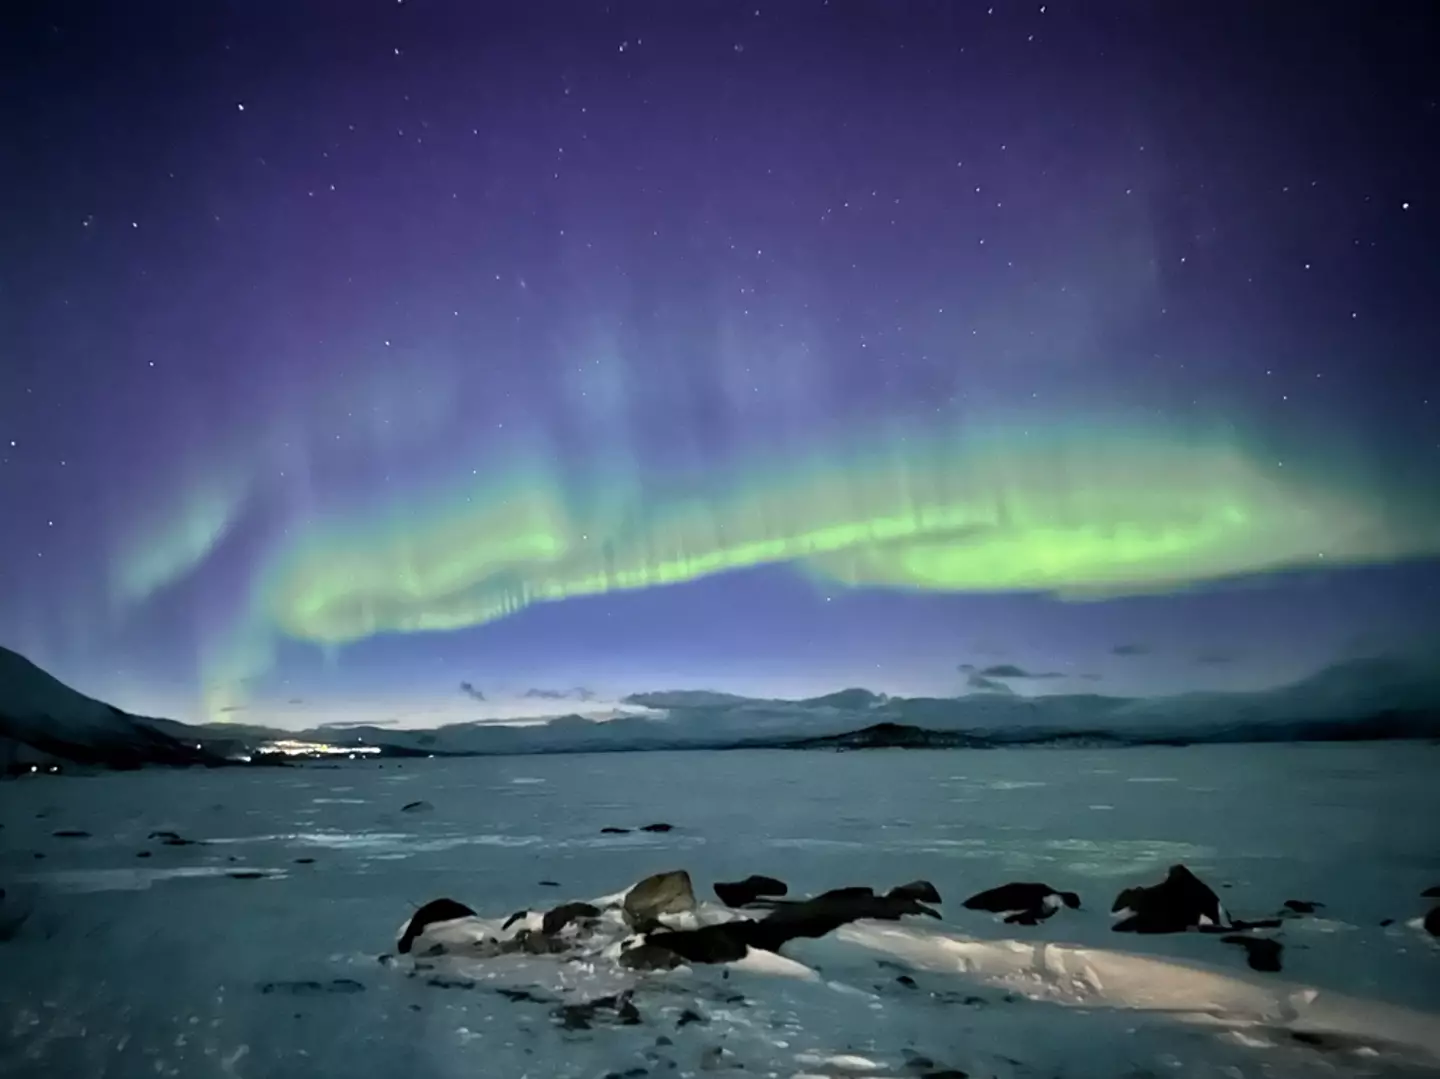 You should escape the city lights if you want to see the Northern Lights.